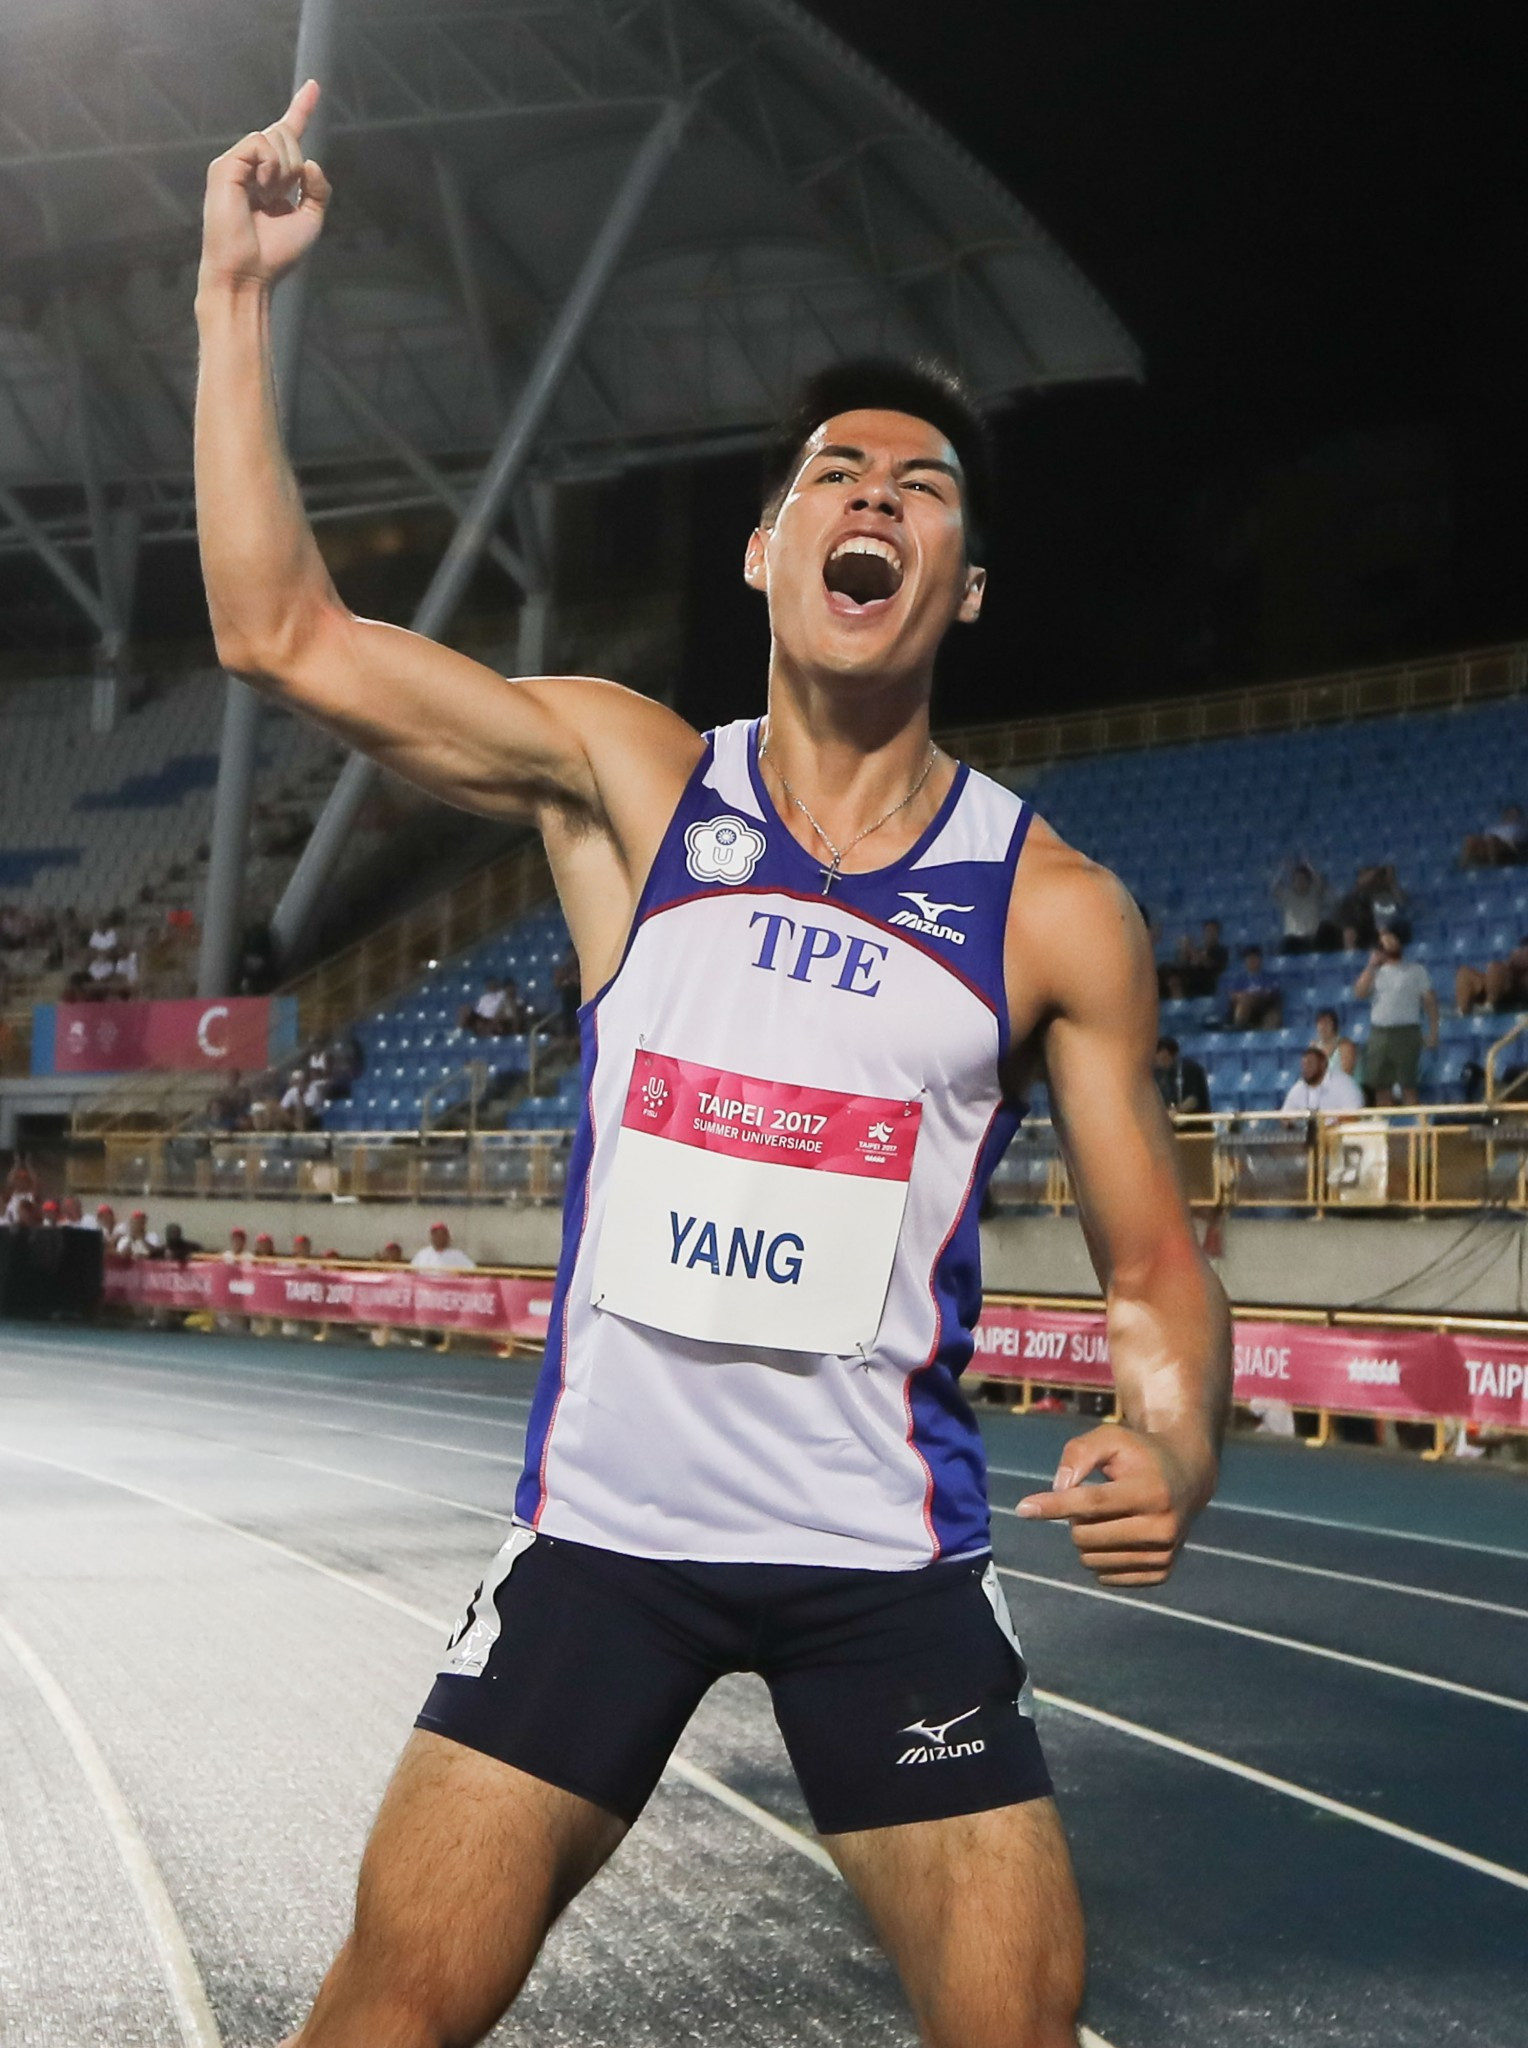 Memorable day for hosts as Yang takes 100m gold for Chinese Taipei